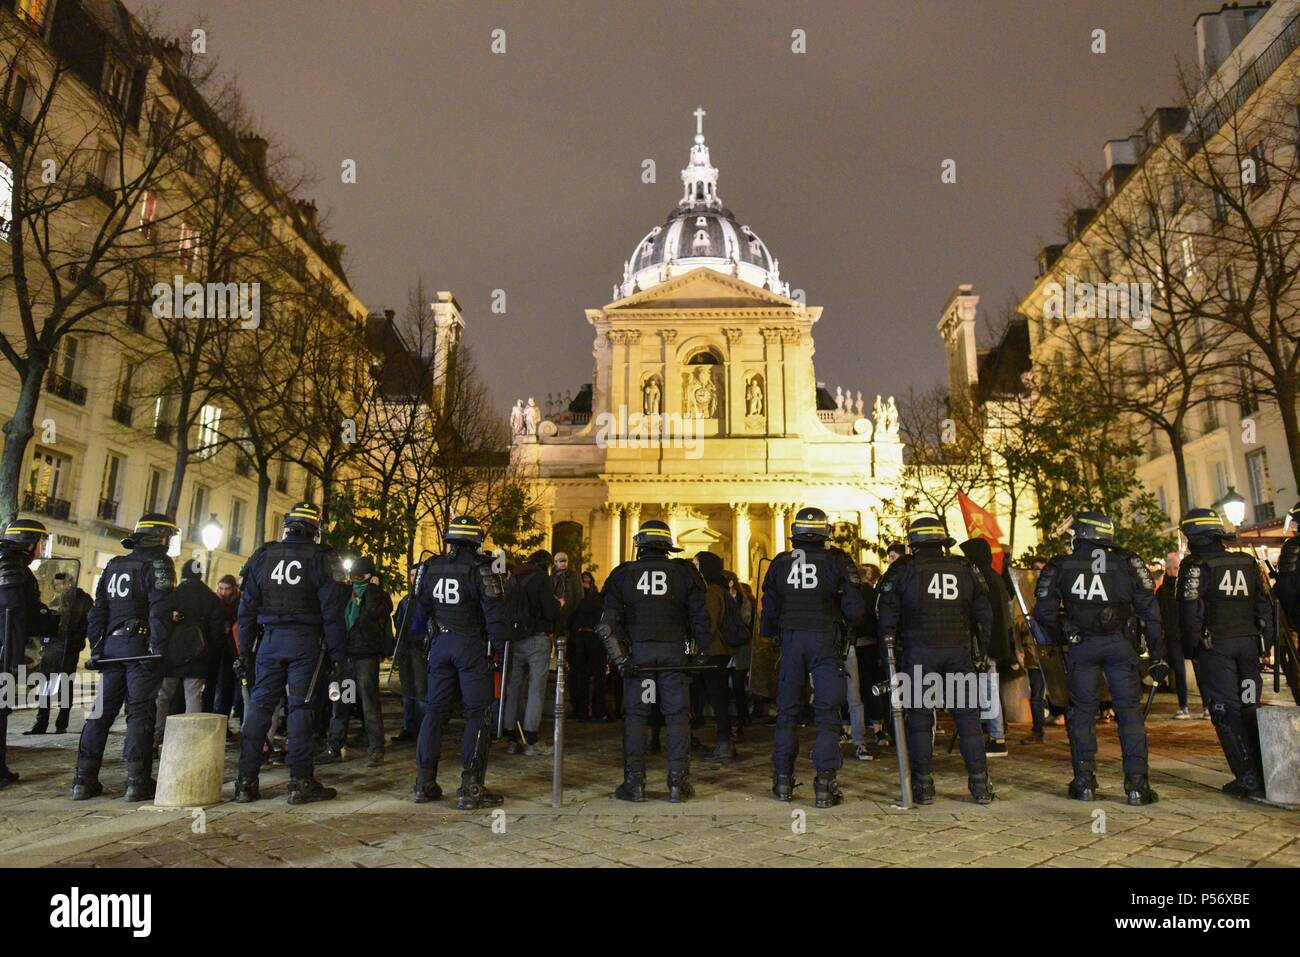 March 23, 2018 - Paris, France: French riot police block the access to the University of Sorbonne after scores of students rallied there to protest against the violent evacuation of students occupying an amphitheater at the University of Montpellier in southern France. Hundreds of riot police were deployed in the neighborhood as authorities worry about actions that would echo the May 68 student protests. Des CRS interviennent place de la Sorbonne pour disperser une manifestation etudiante. Les mois de mars et d'avril 2018 ont ete marques par une recrudescence de manifestations etudiantes et de Stock Photo